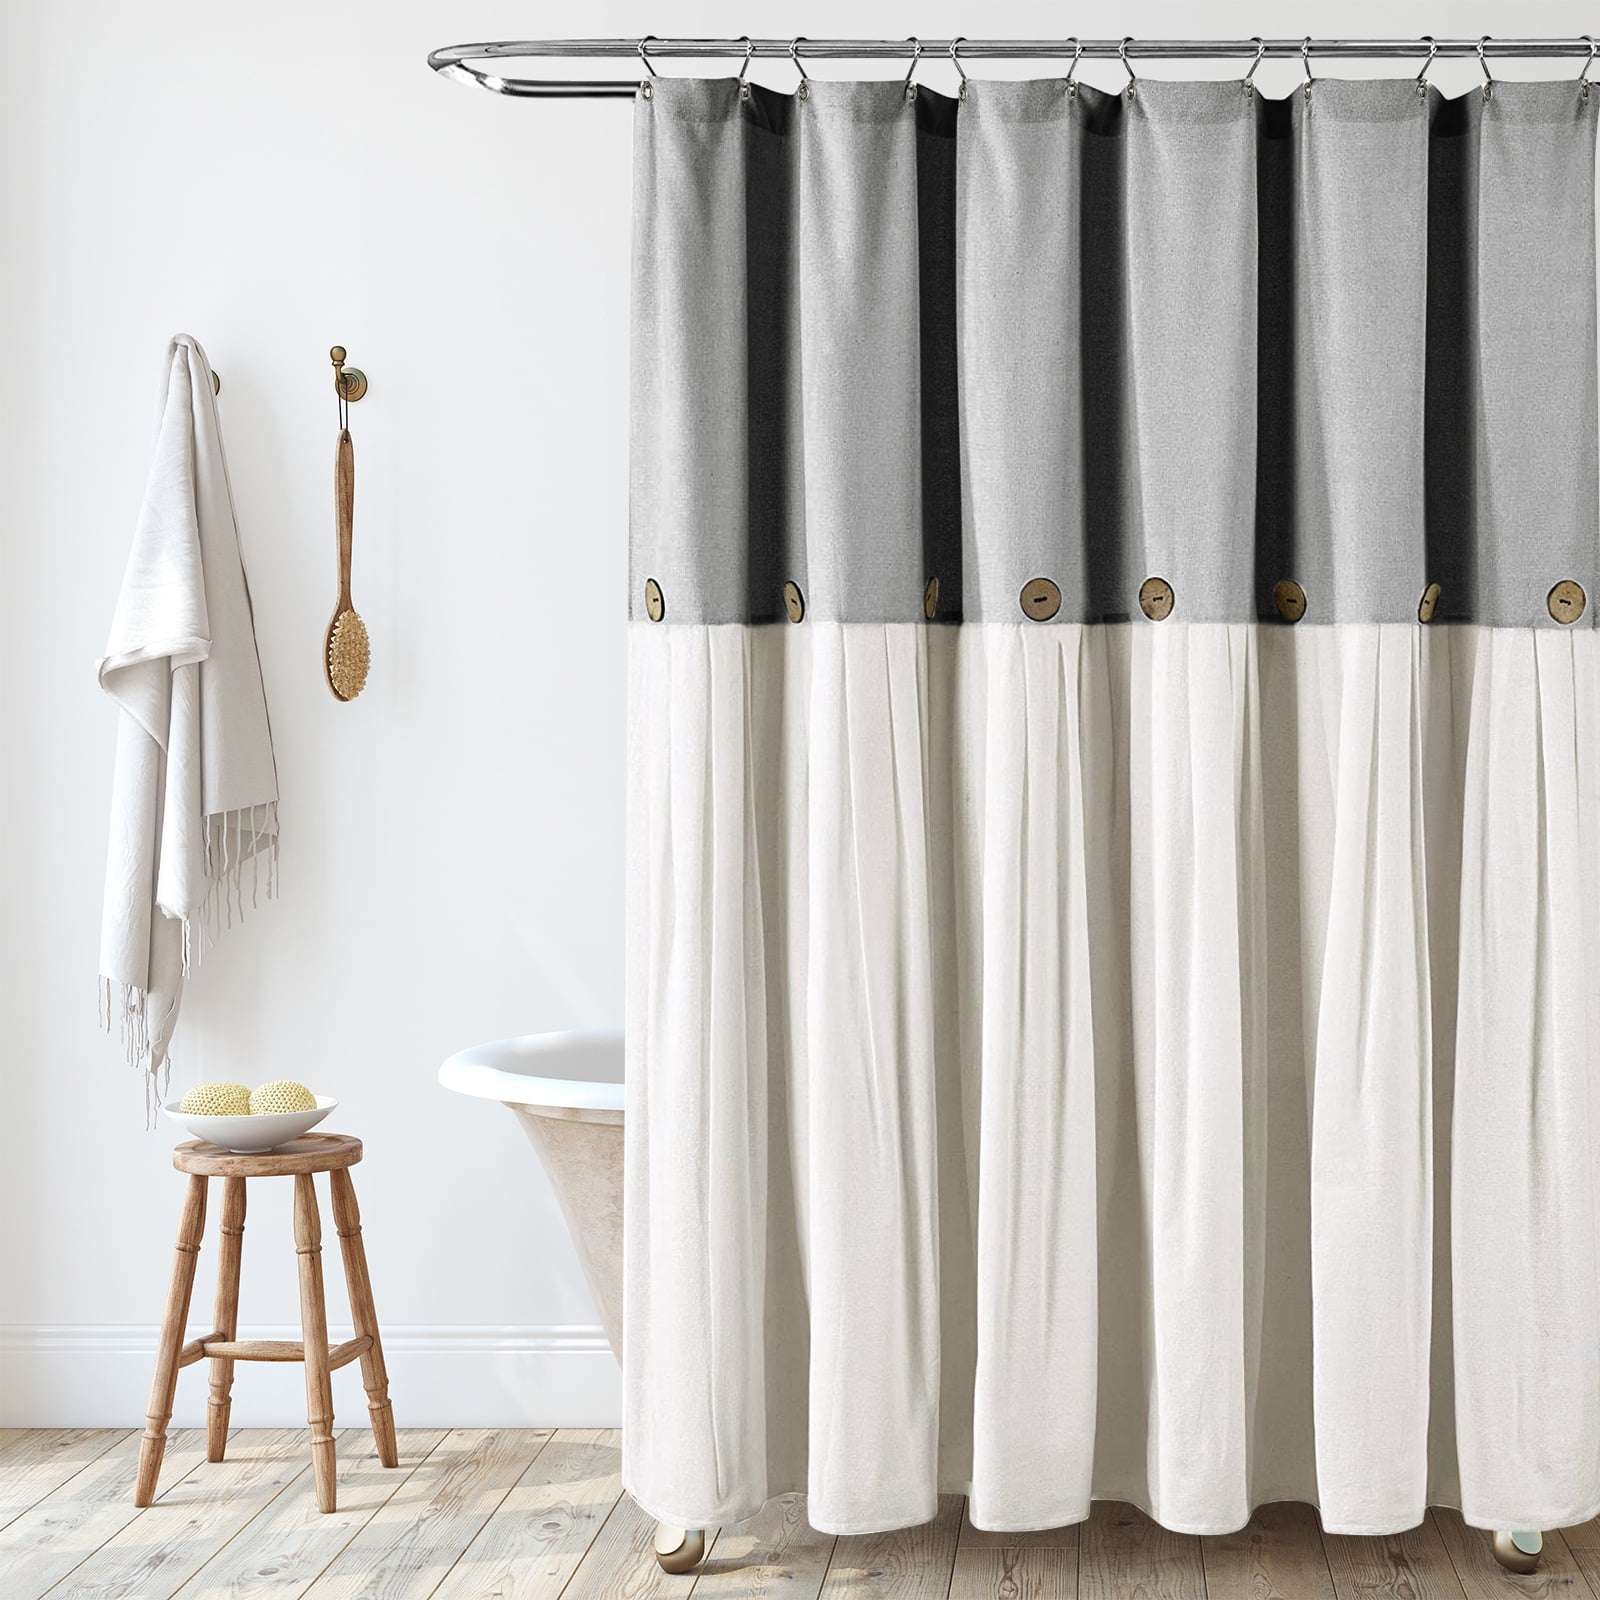 Linen Button Shower Curtain Gray and off White Farmhouse Shower Curtains  for Bathroom 72x72 inch - Walmart.com